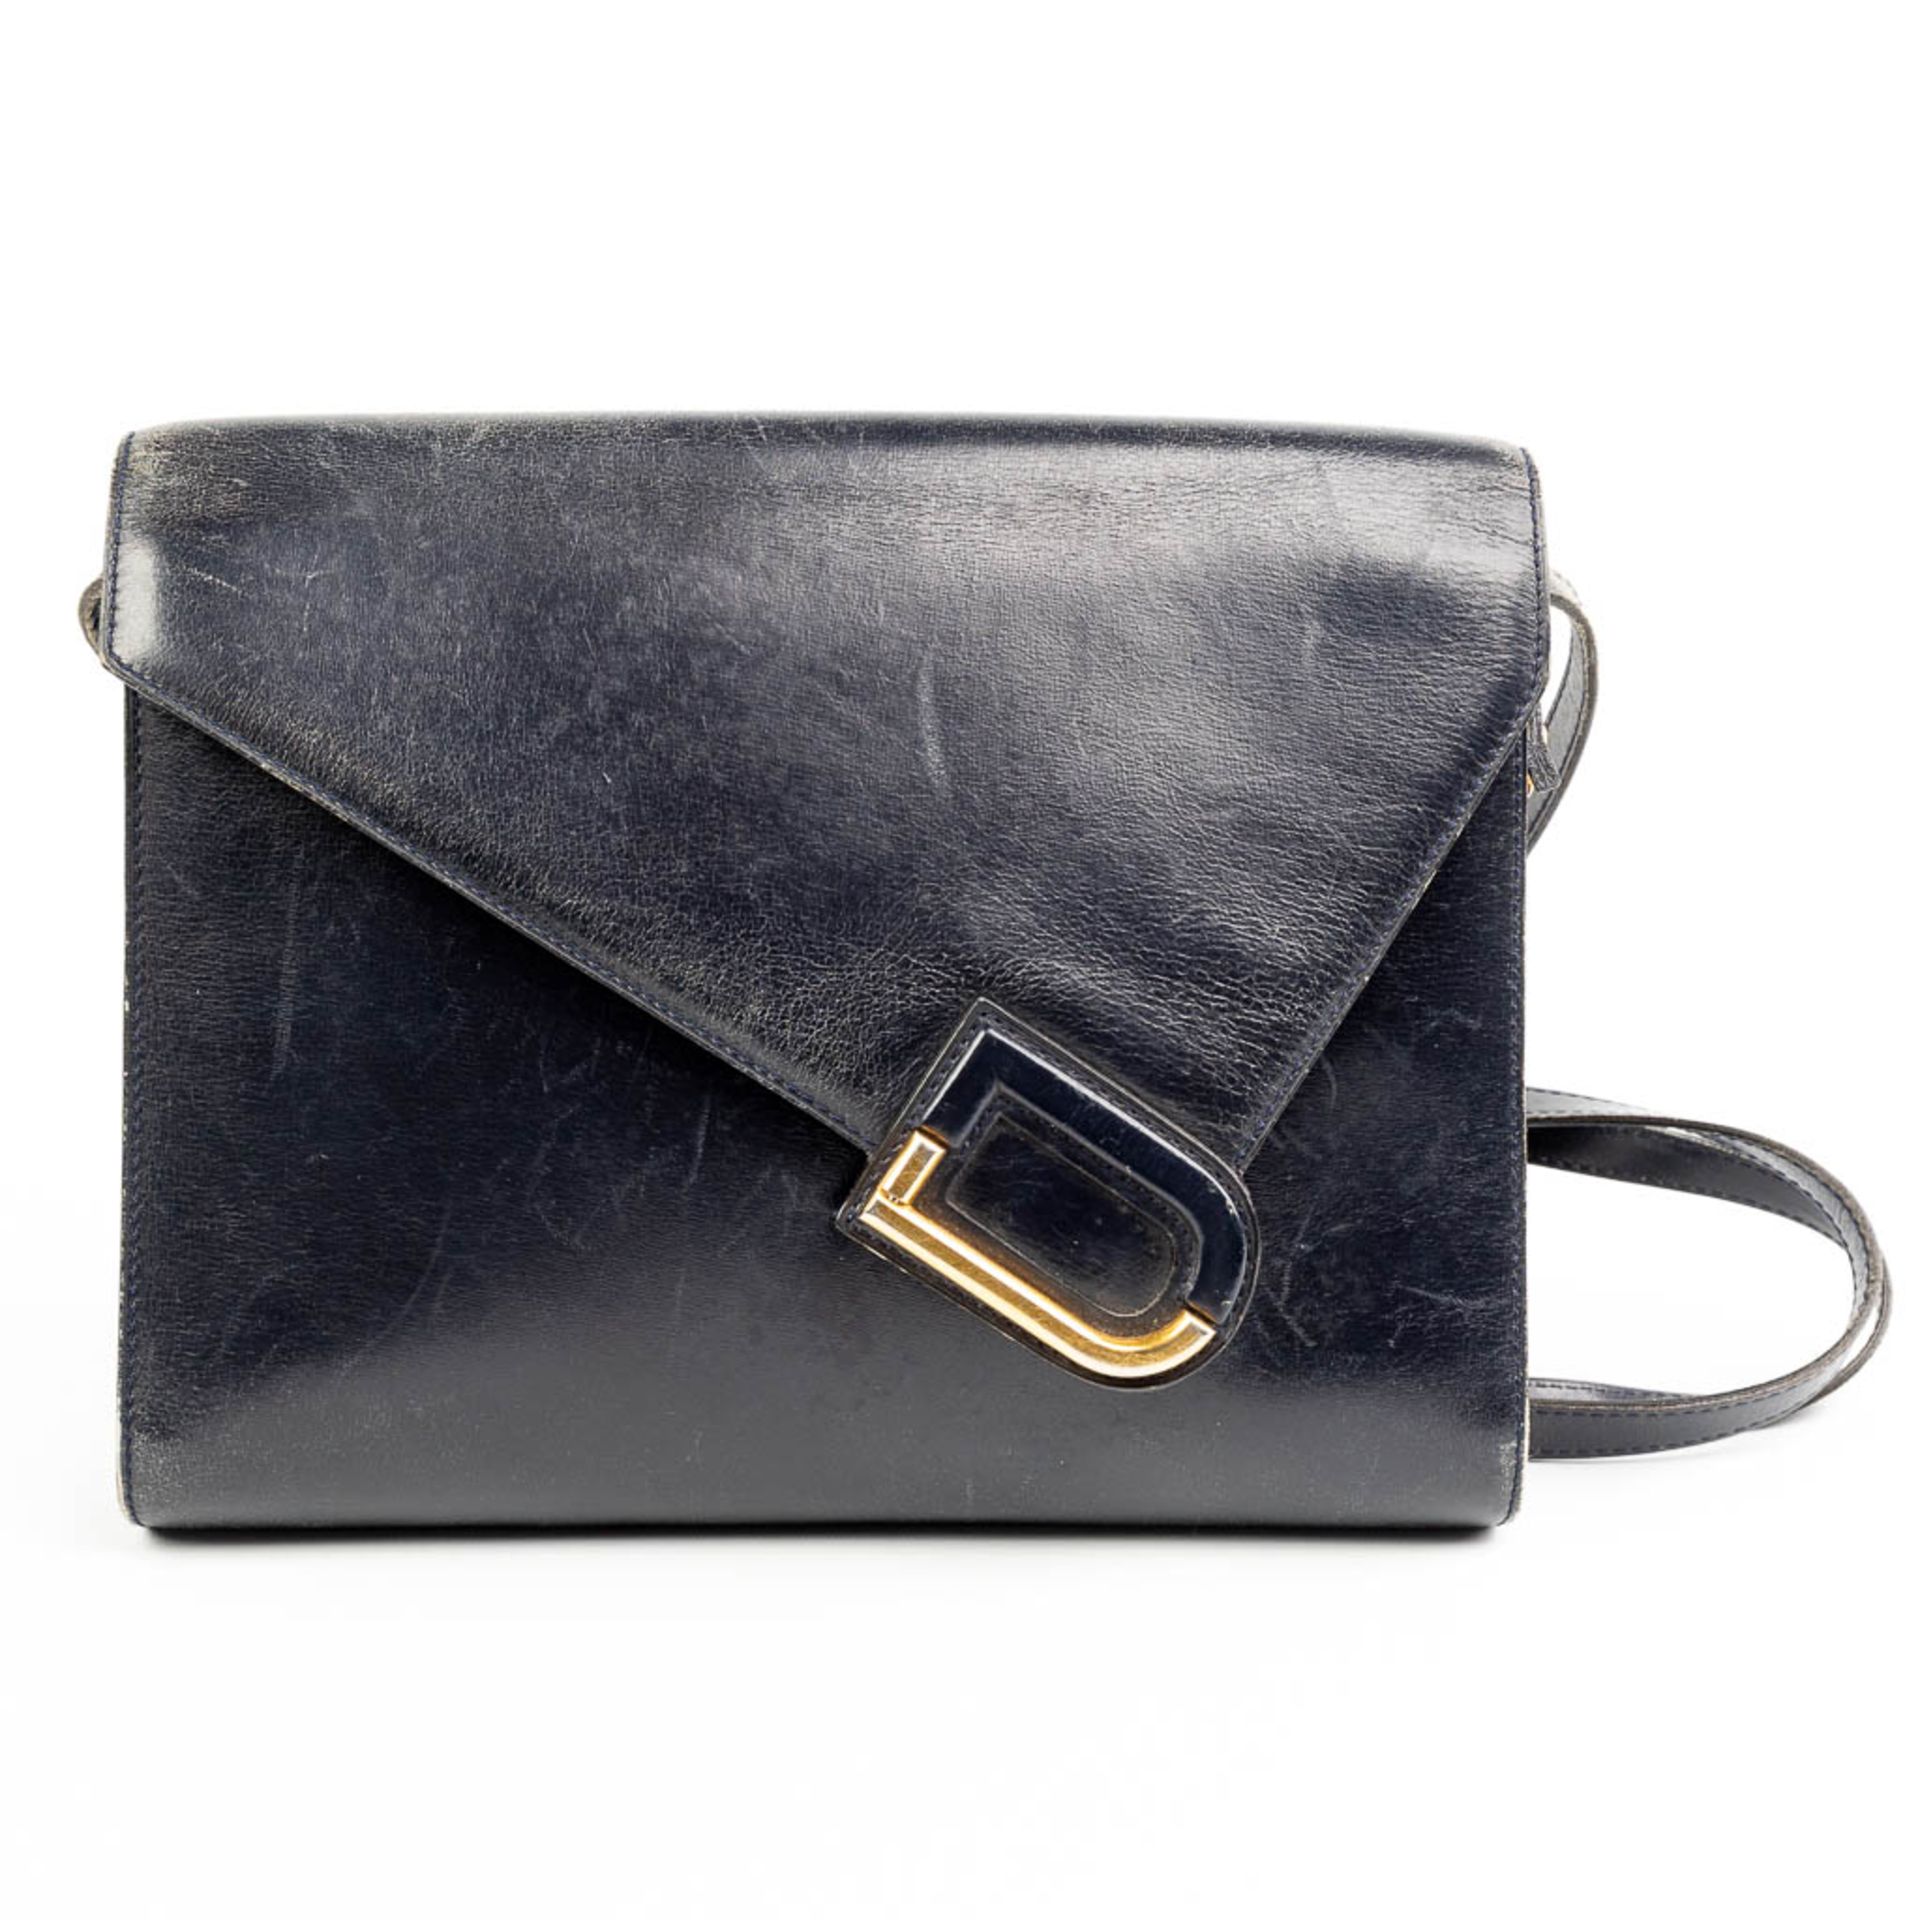 A purse made of black leather and marked Delvaux. - Image 8 of 10